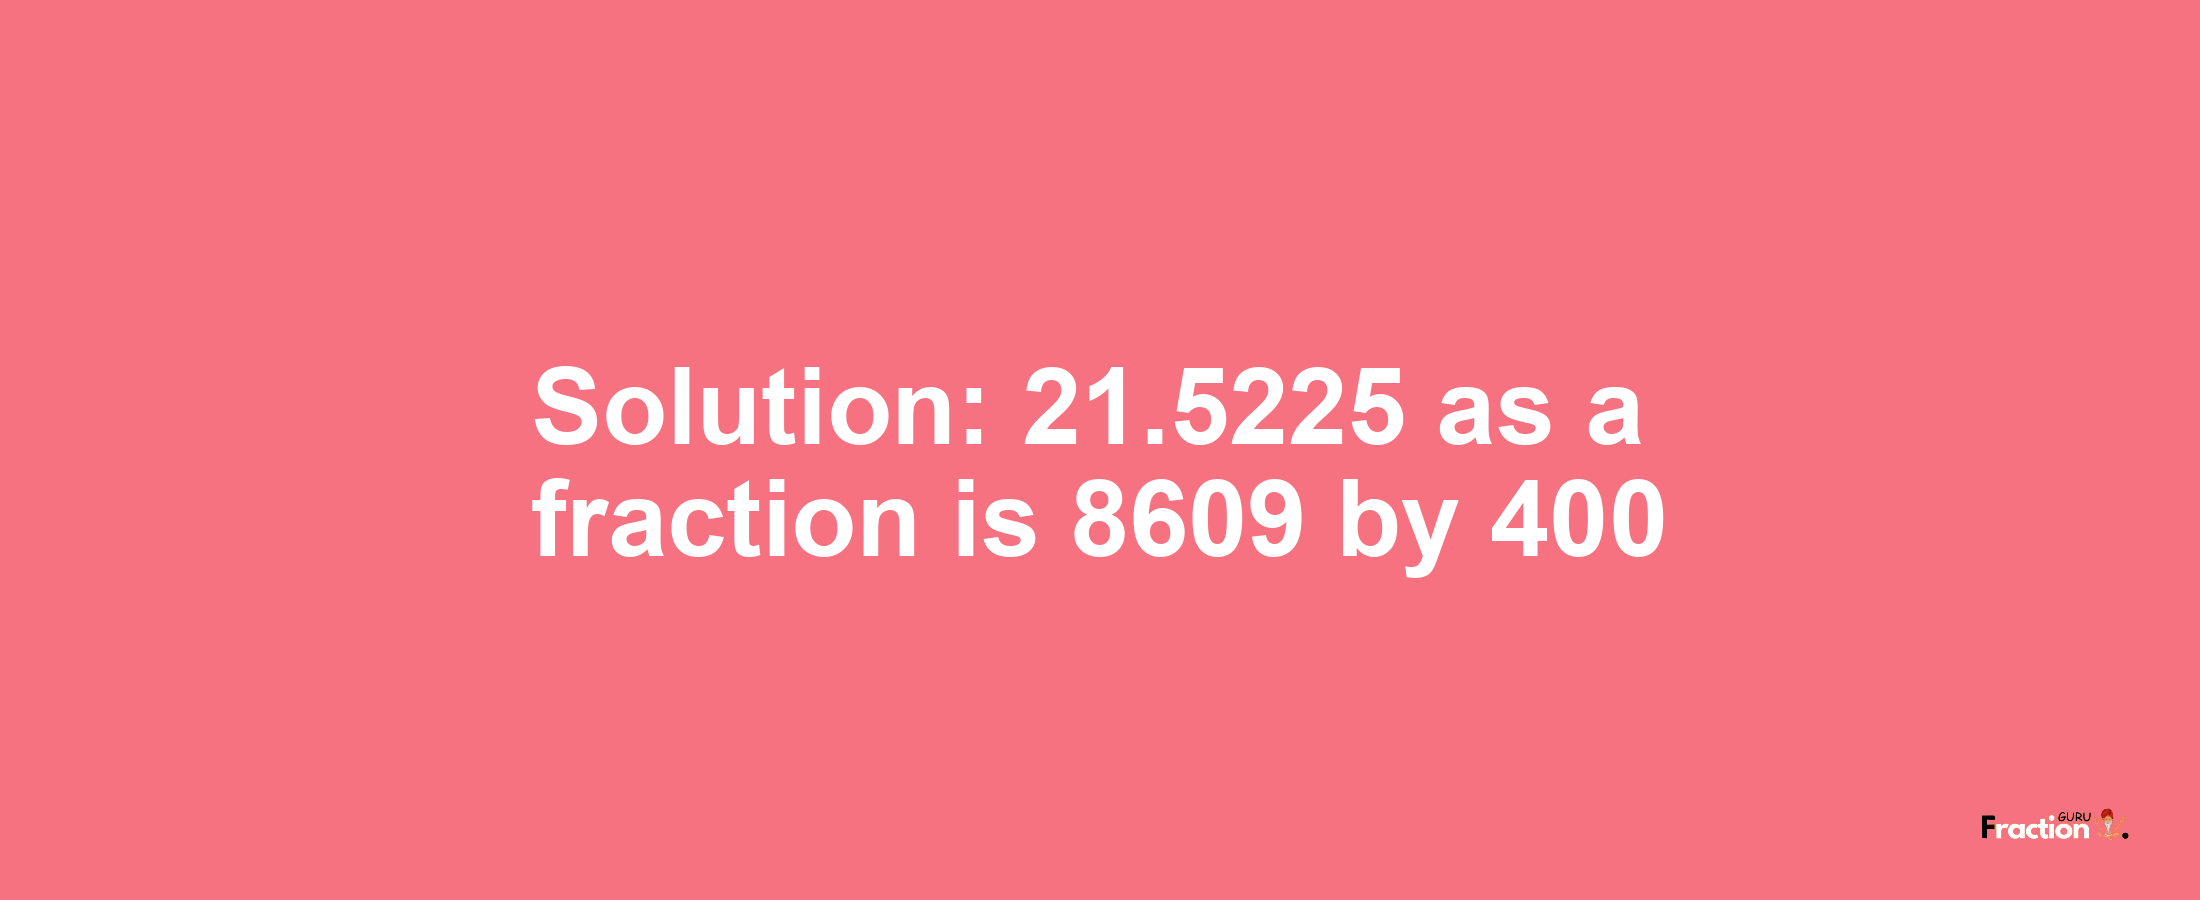 Solution:21.5225 as a fraction is 8609/400